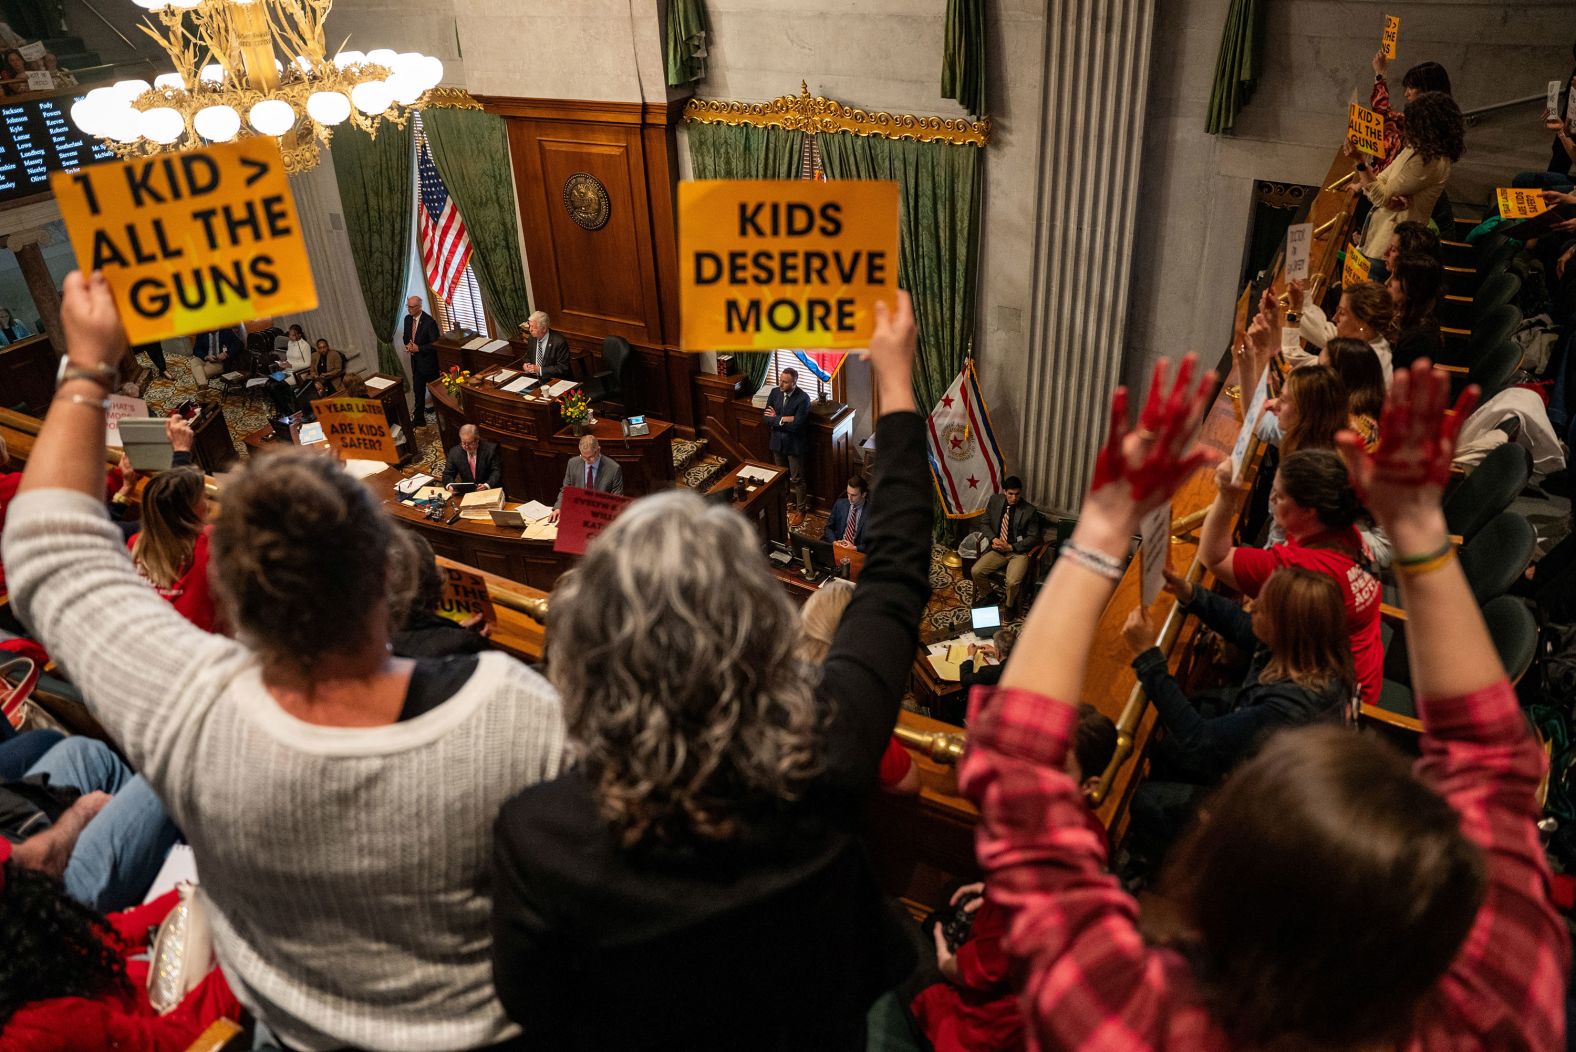 Gun reform activists gather in the gallery of the Tennessee state Senate in Nashville on Tuesday, April 9. The protesters came to <a href="index.php?page=&url=https%3A%2F%2Fwww.cnn.com%2F2024%2F04%2F10%2Fus%2Ftennessee-teachers-gun-carry-bill%2Findex.html" target="_blank">oppose a bill that would authorize teachers and staff in K-12 public schools to carry concealed handguns</a> on school grounds. The Senate passed <a href="index.php?page=&url=https%3A%2F%2Fwww.capitol.tn.gov%2FBills%2F113%2FBill%2FSB1325.pdf" target="_blank" target="_blank">SB 1325</a> in a 26-5 vote as the noisy, sign-waving opponents urged its demise and just over a year after a <a href="index.php?page=&url=https%3A%2F%2Fwww.cnn.com%2Finteractive%2F2023%2F03%2Fus%2Ftimeline-covenant-school-shooting-nashville%2F" target="_blank">fatal shooting at a private Christian school</a> in Nashville where <a href="index.php?page=&url=https%3A%2F%2Fwww.cnn.com%2F2024%2F03%2F27%2Fus%2Ftennessee-school-shooting-human-chain%2Findex.html" target="_blank">three 9-year-olds and three adults</a> were killed. The measure would require approval by the state House before moving to the desk of Republican Gov. Bill Lee, whose office did not immediately respond to CNN's request for comment. 